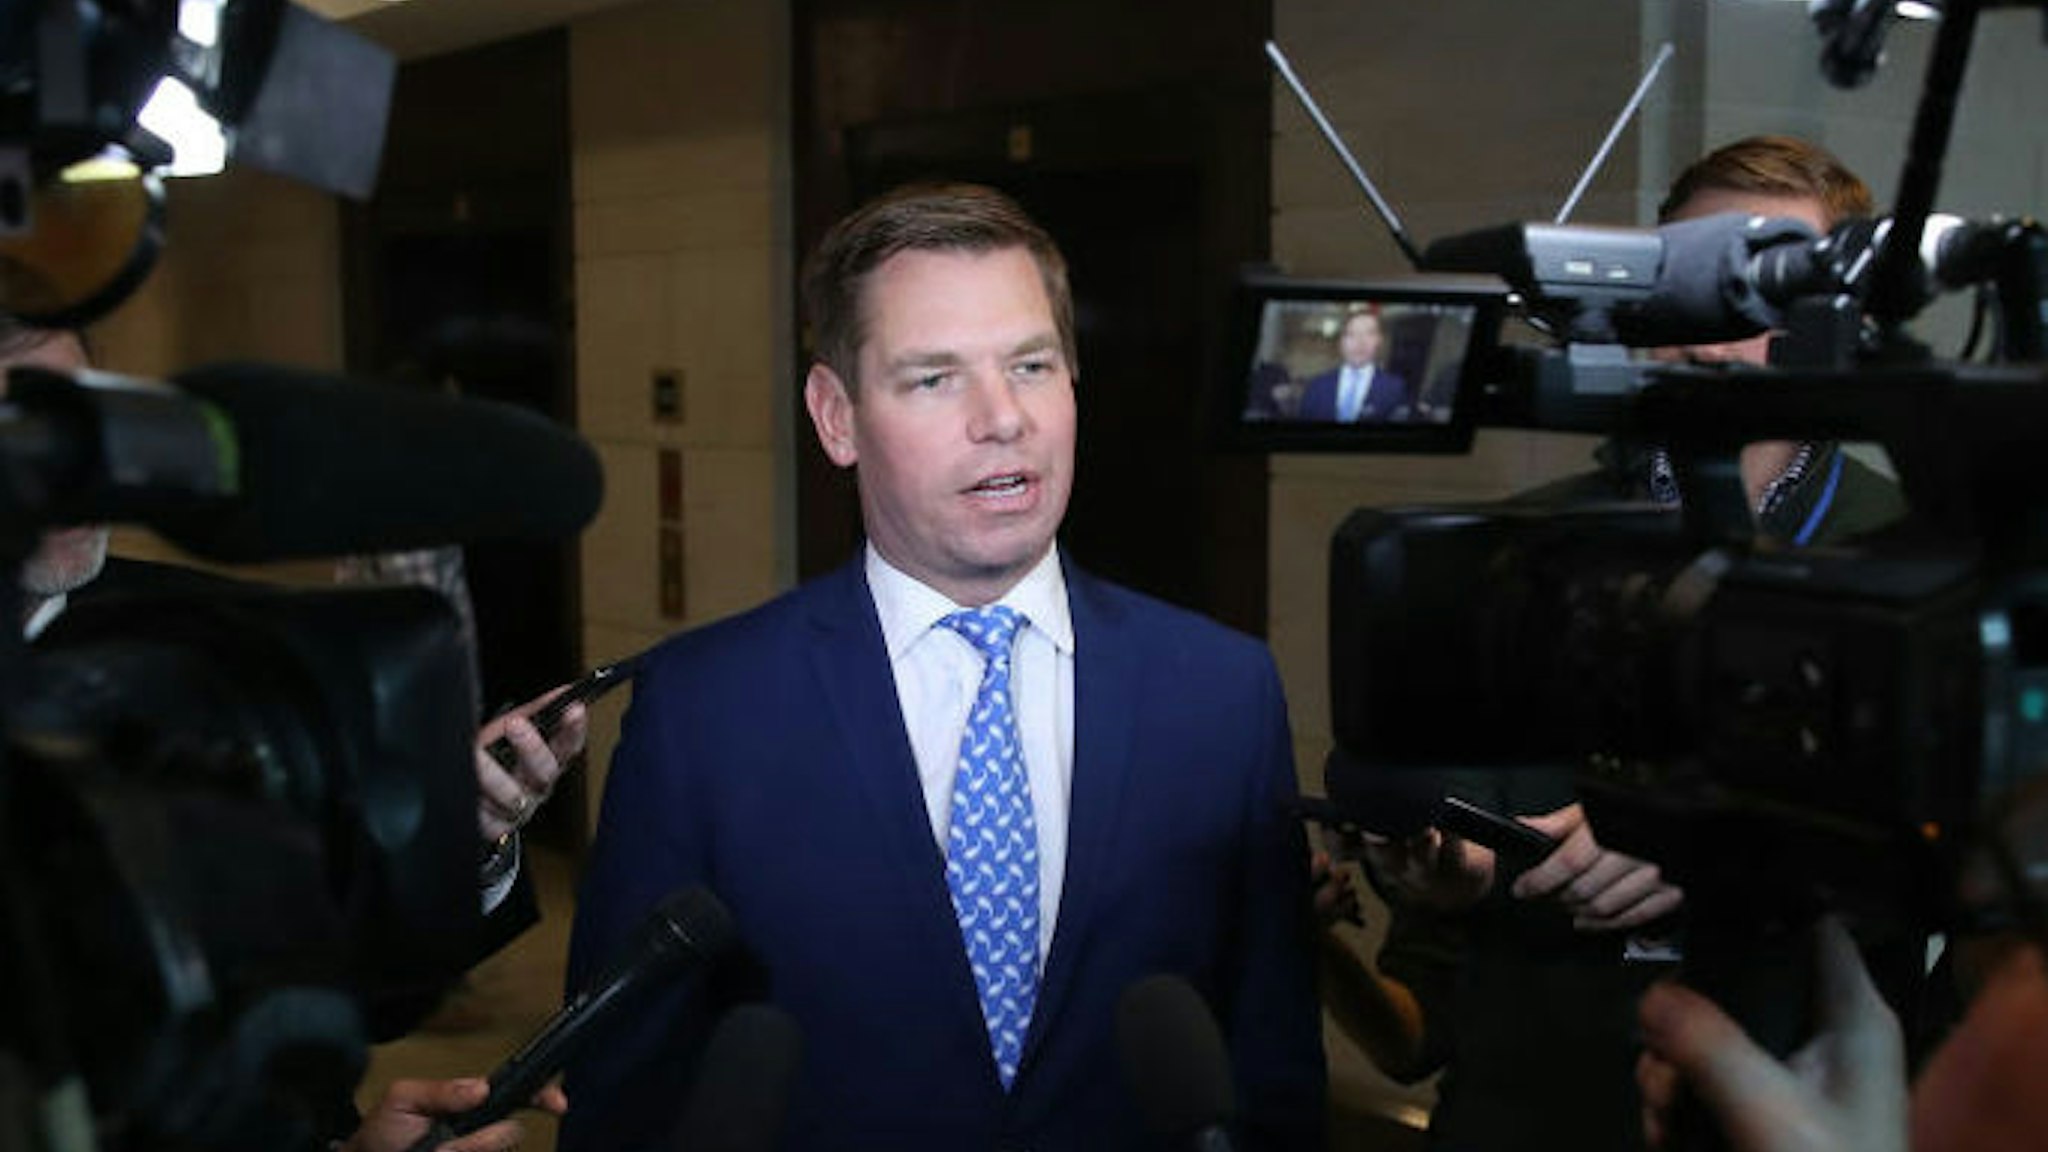 Rep. Eric Swalwell (D-CA), talks to the media outside of a closed-door hearing at the U.S. Capitol on November 7, 2019 in Washington, DC. the Chairman of the House Intelligence Committee, Adam Schiff (D-CA) has announced that public hearings will begin next week in the impeachment inquiry against U.S. President Donald Trump. (Photo by Mark Wilson/Getty Images)